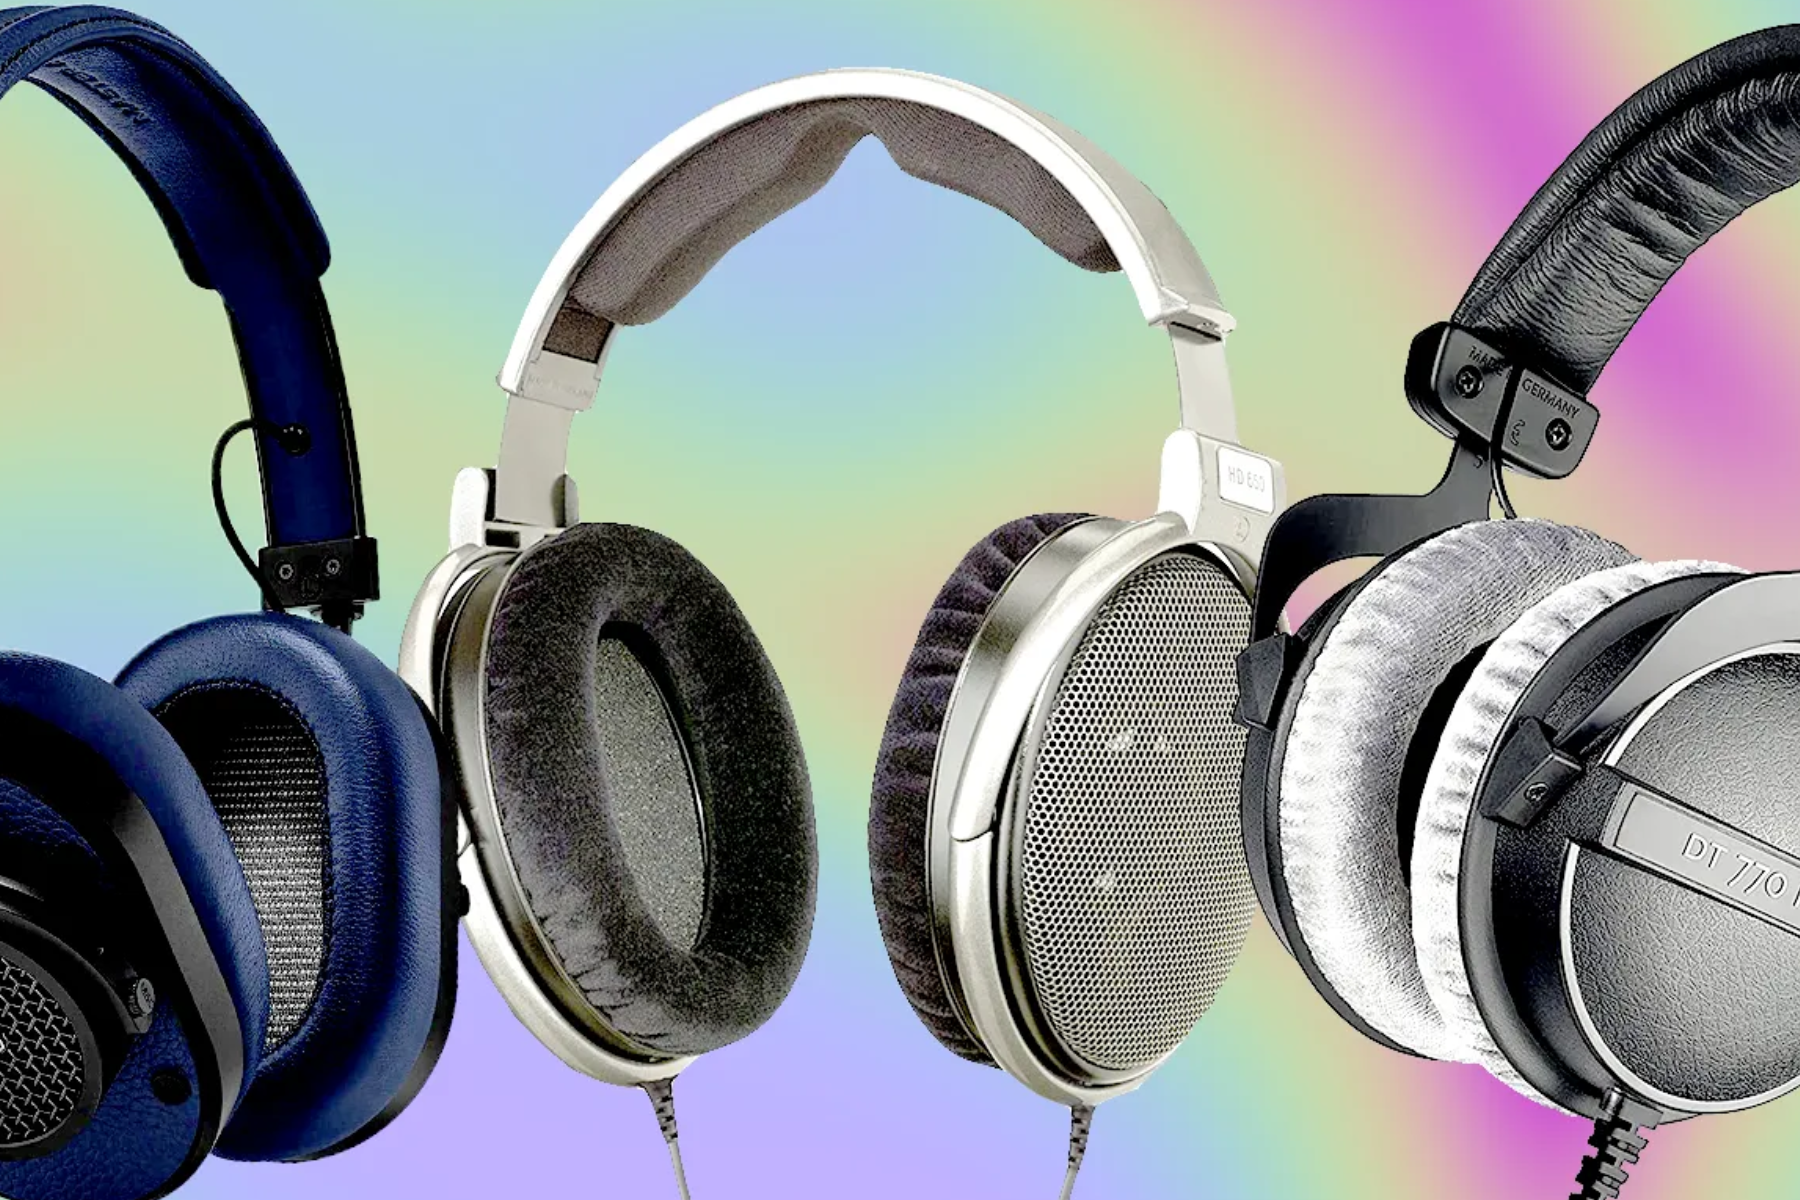 Three distinct types and colors of wired headphones